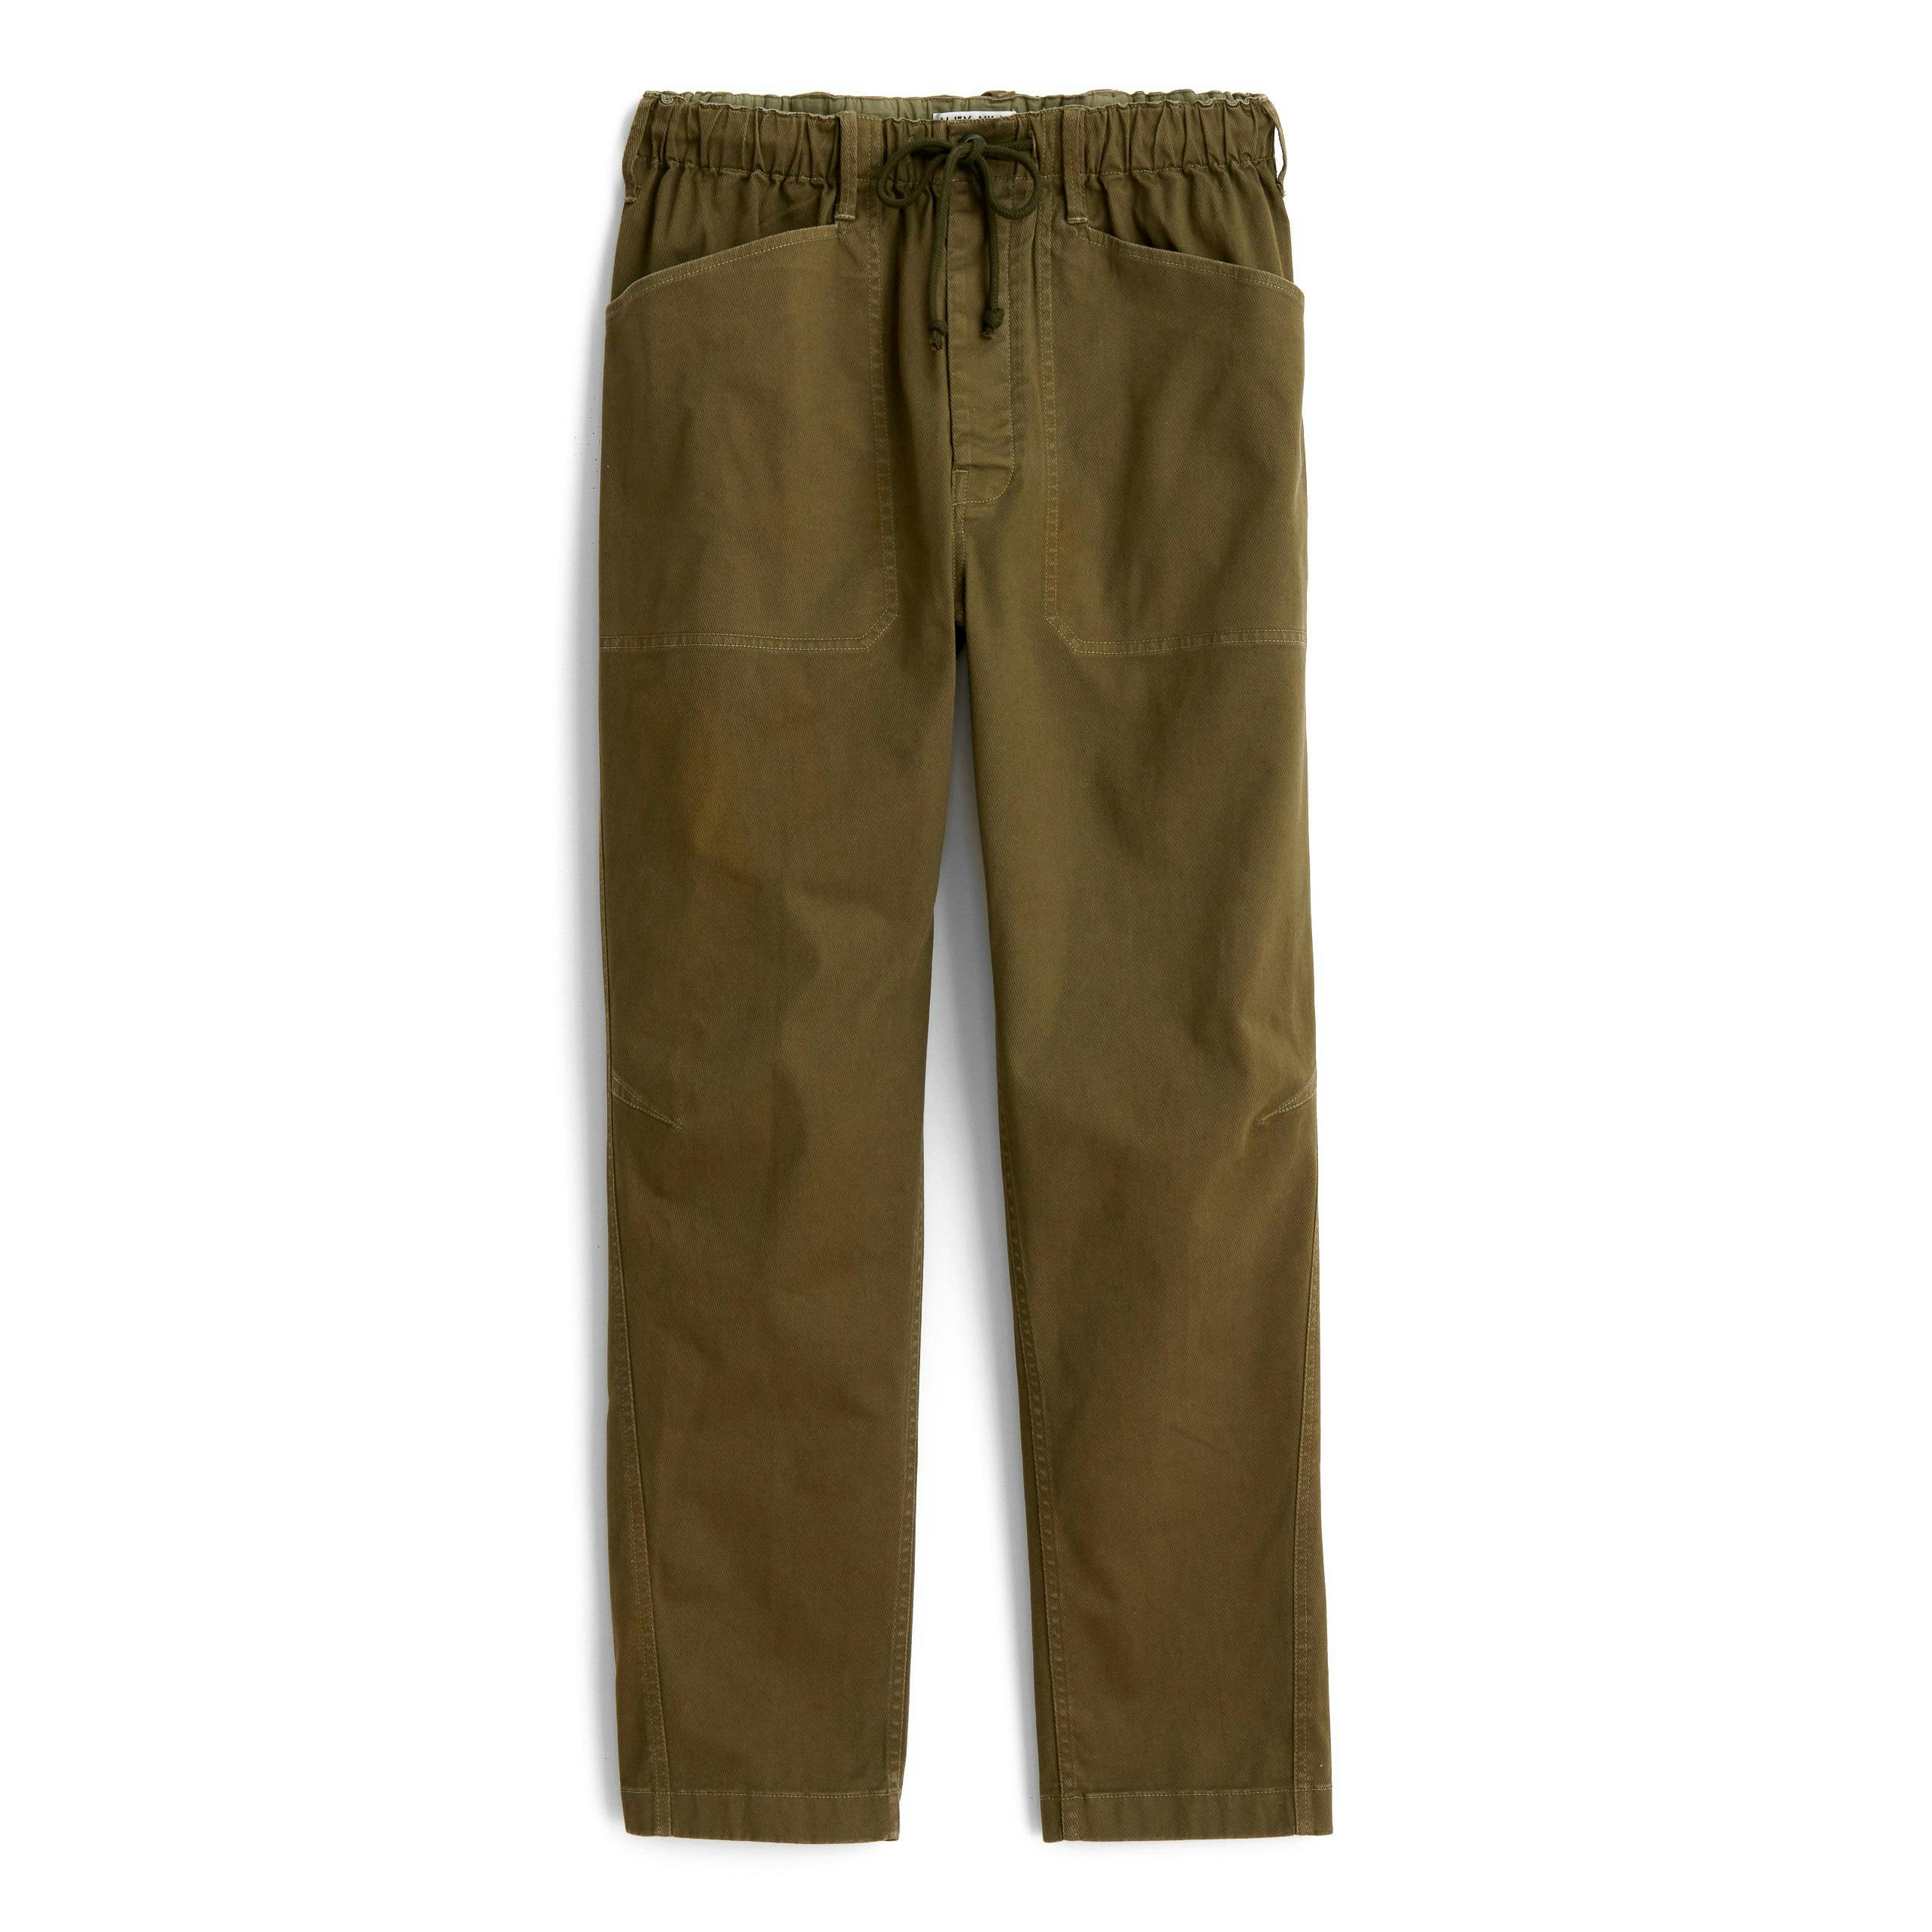 Pull on Button Fly Pants